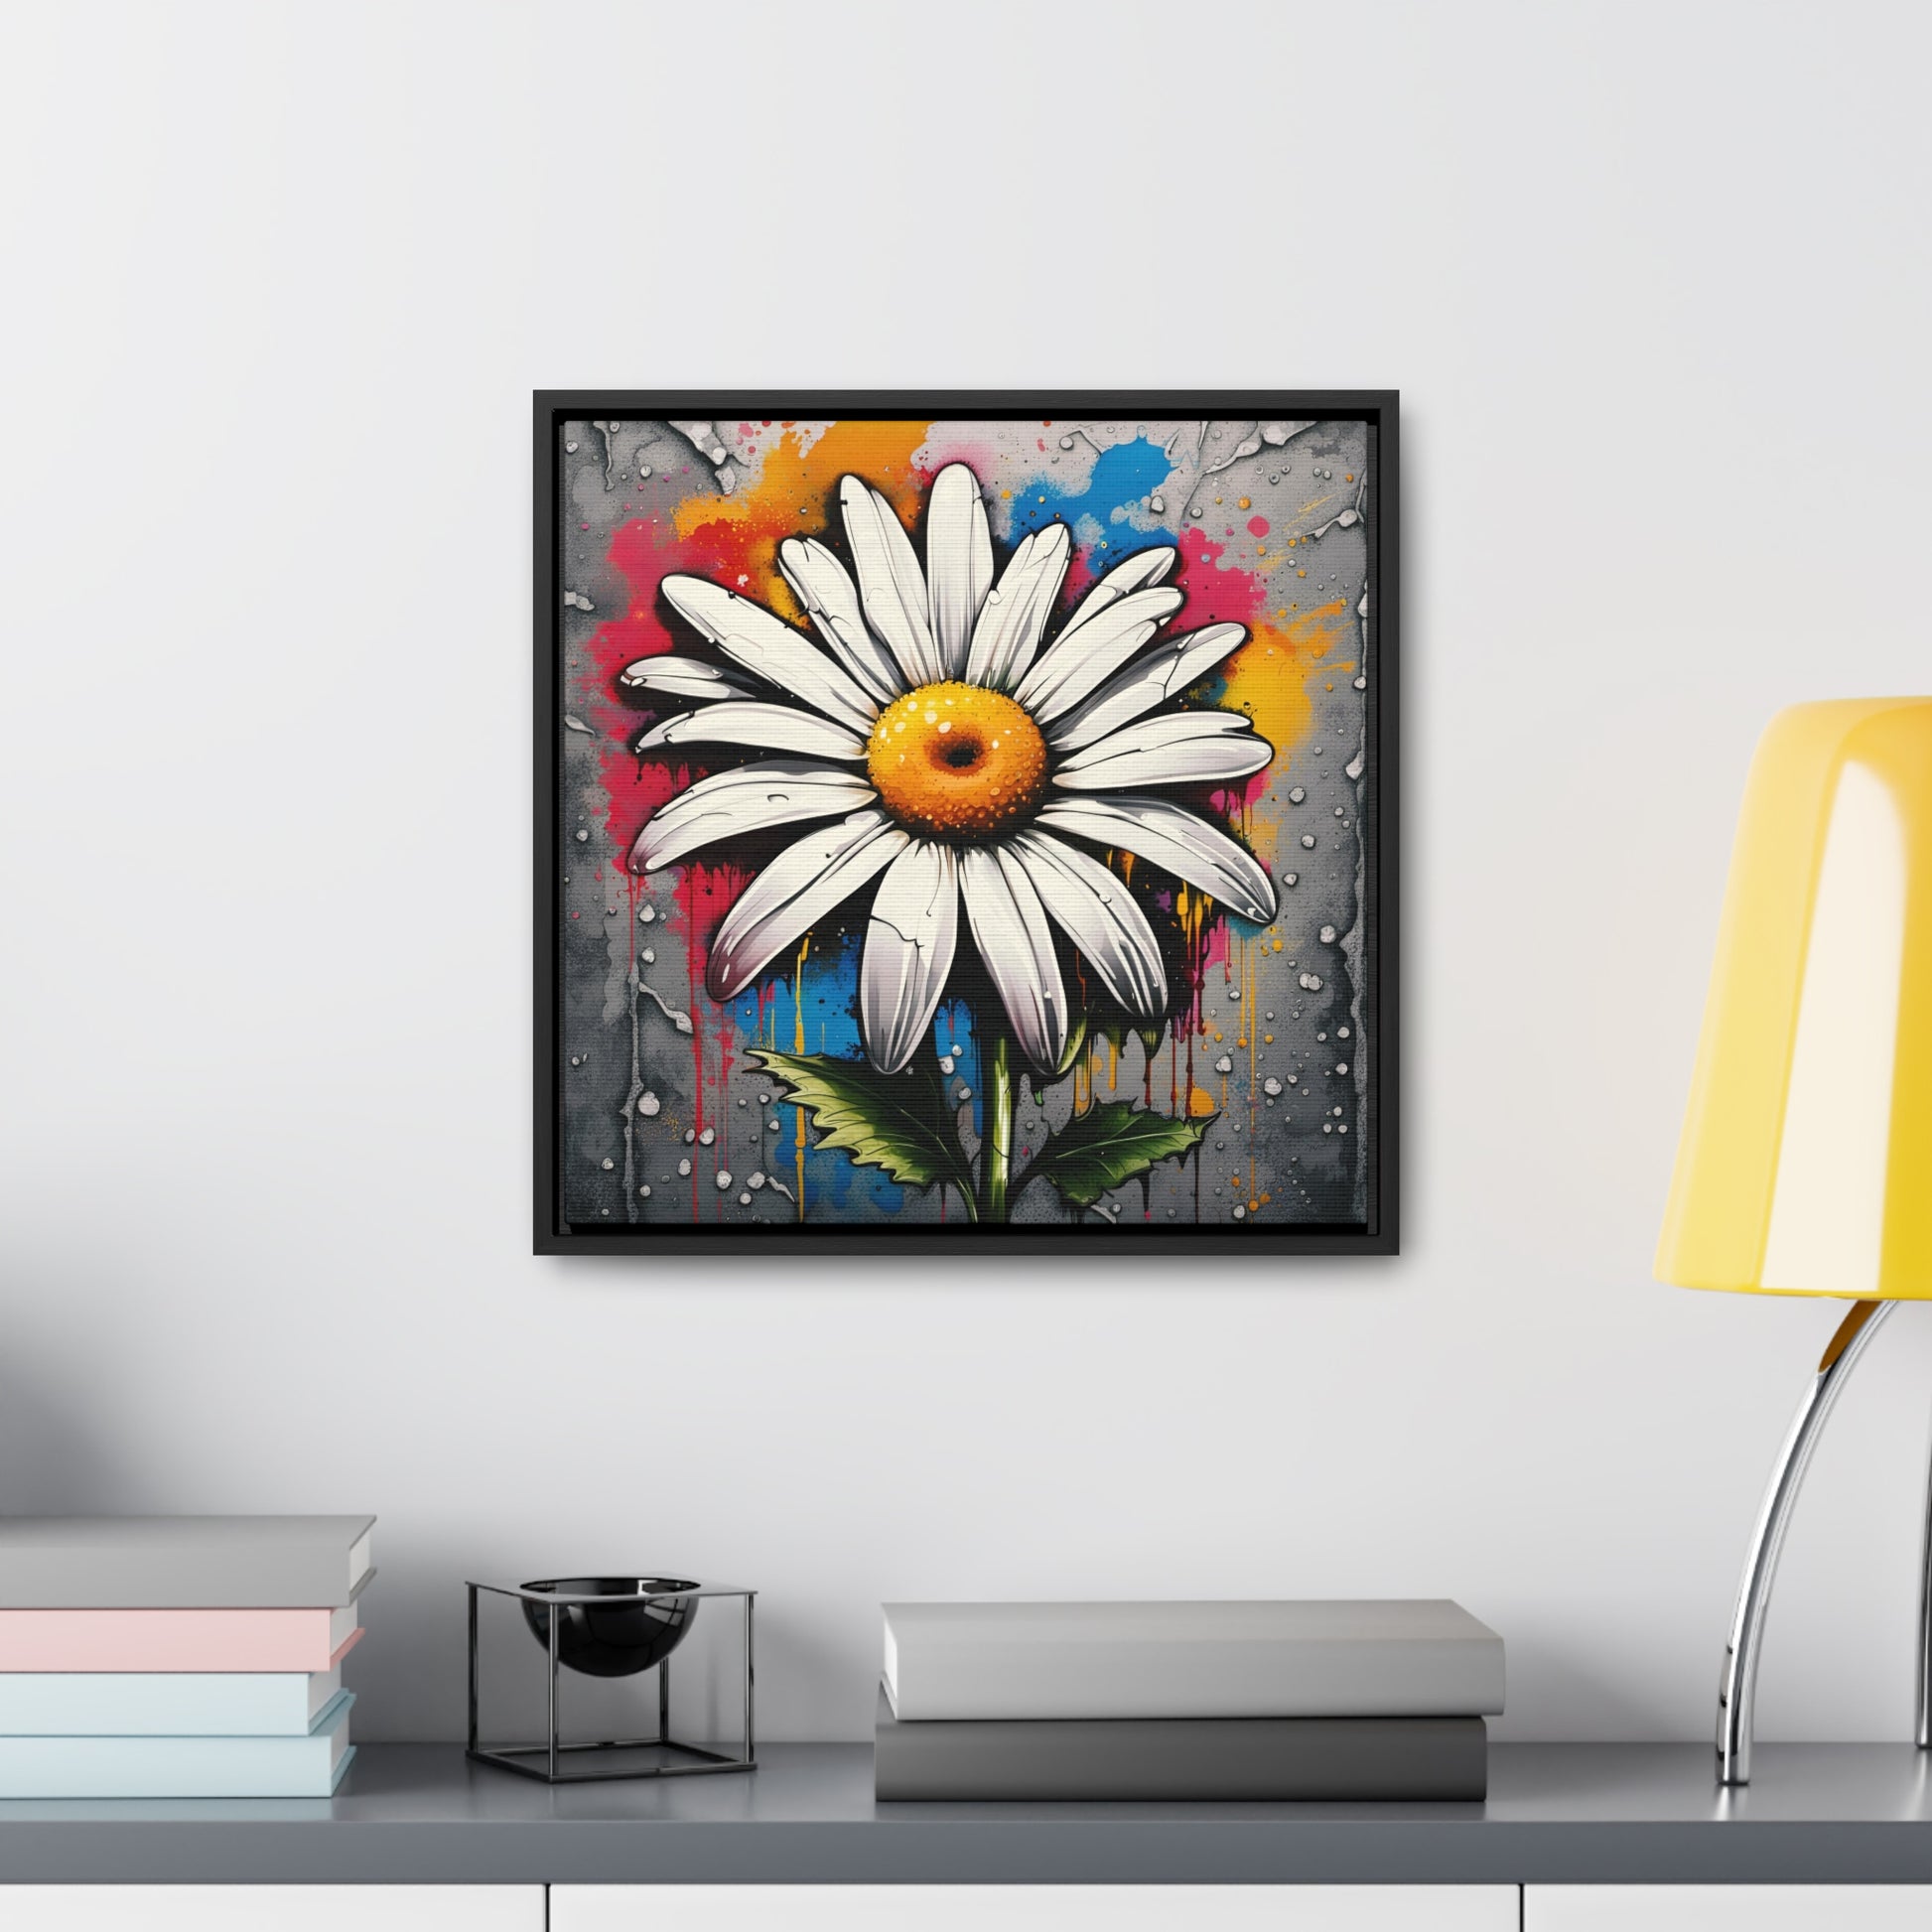 Floral themed Wall Art Print - Street Art Style Graffiti Daisy Printed on Canvas in a Floating Frame 16x16